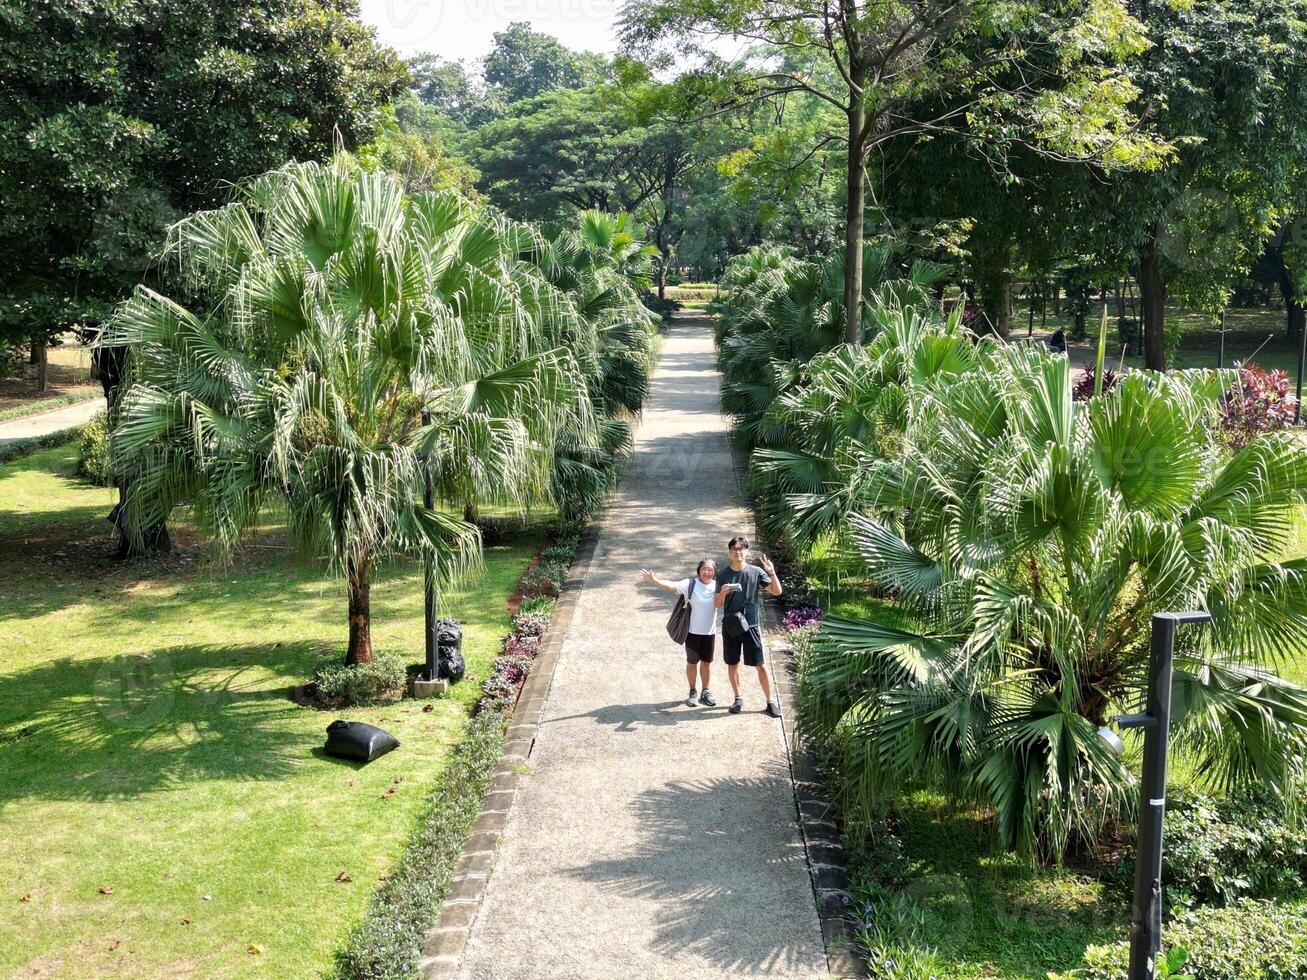 Jakarta, Indonesia, 2023 - Morning walk on a green park footpath surrounded by trees, in Gelora Bung Karno photo